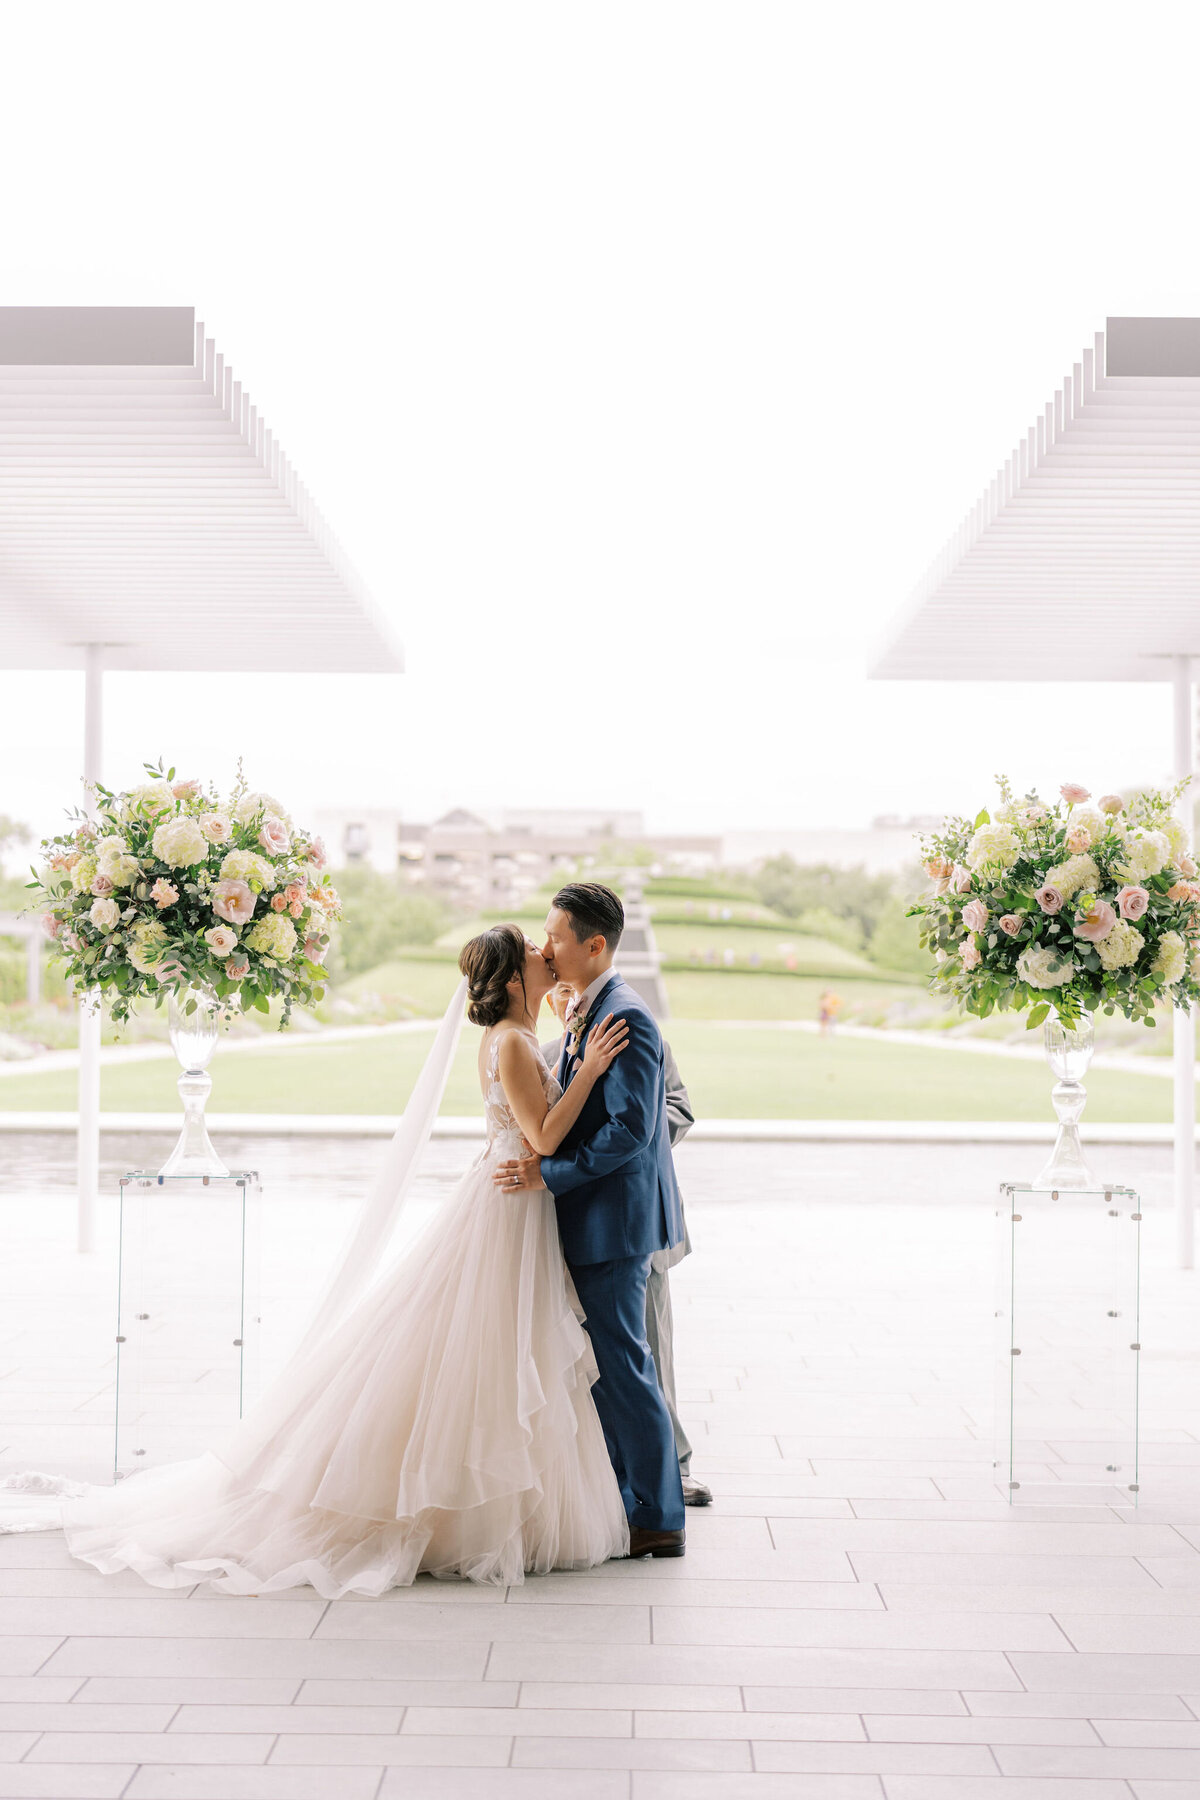 Bride and groom's first kiss in outdoor wedding ceremony in houston, texas